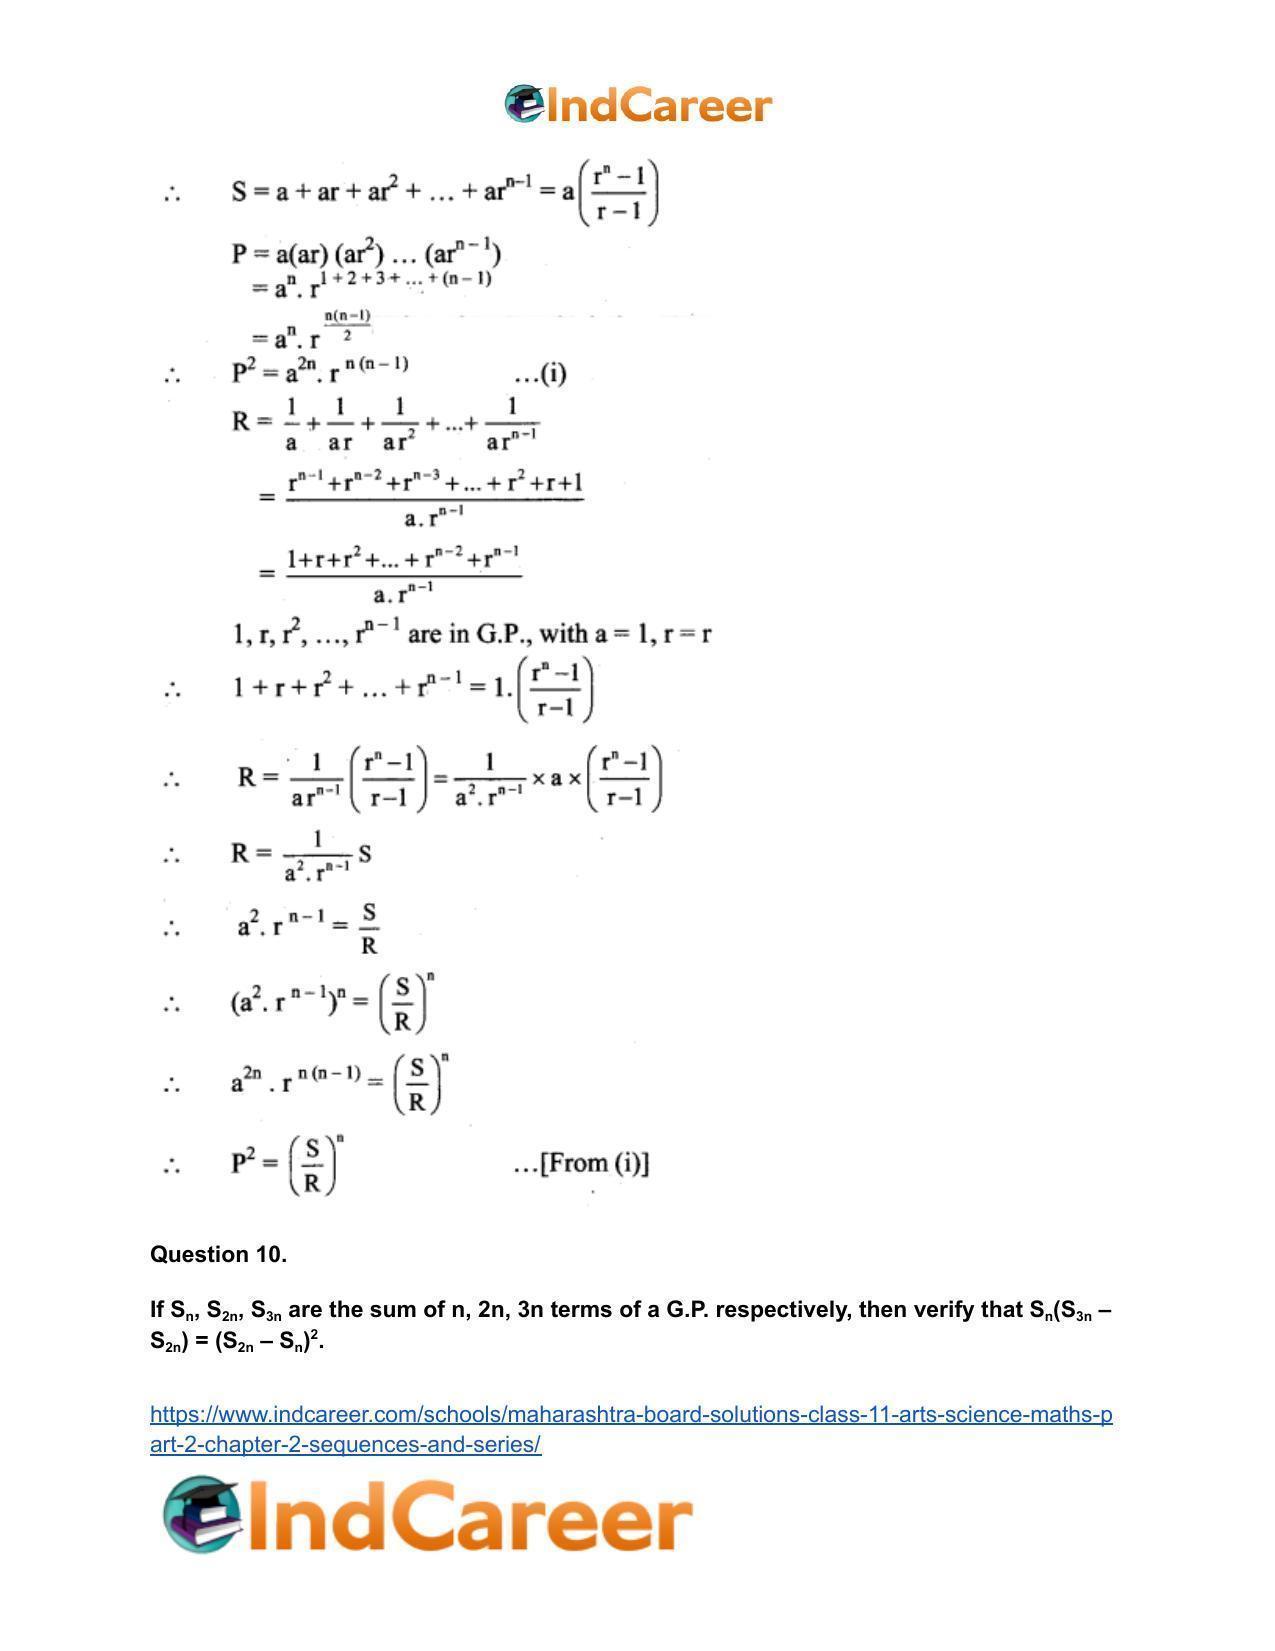 Maharashtra Board Solutions Class 11-Arts & Science Maths (Part 2): Chapter 2- Sequences and Series - Page 34